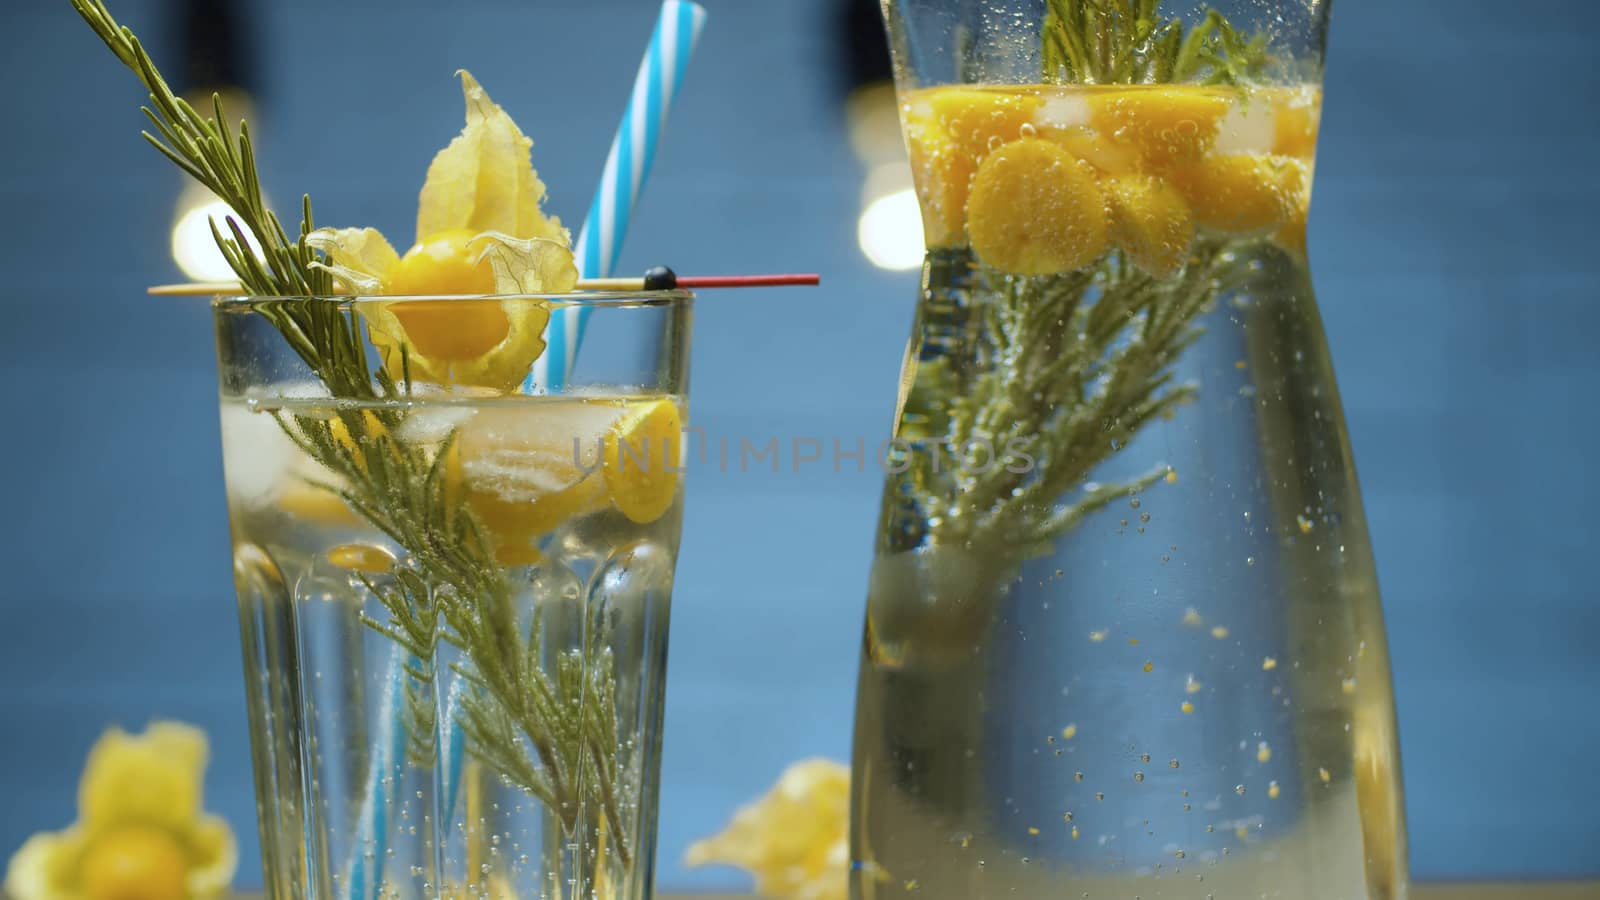 Rosemary and physalis cold drink by Alize